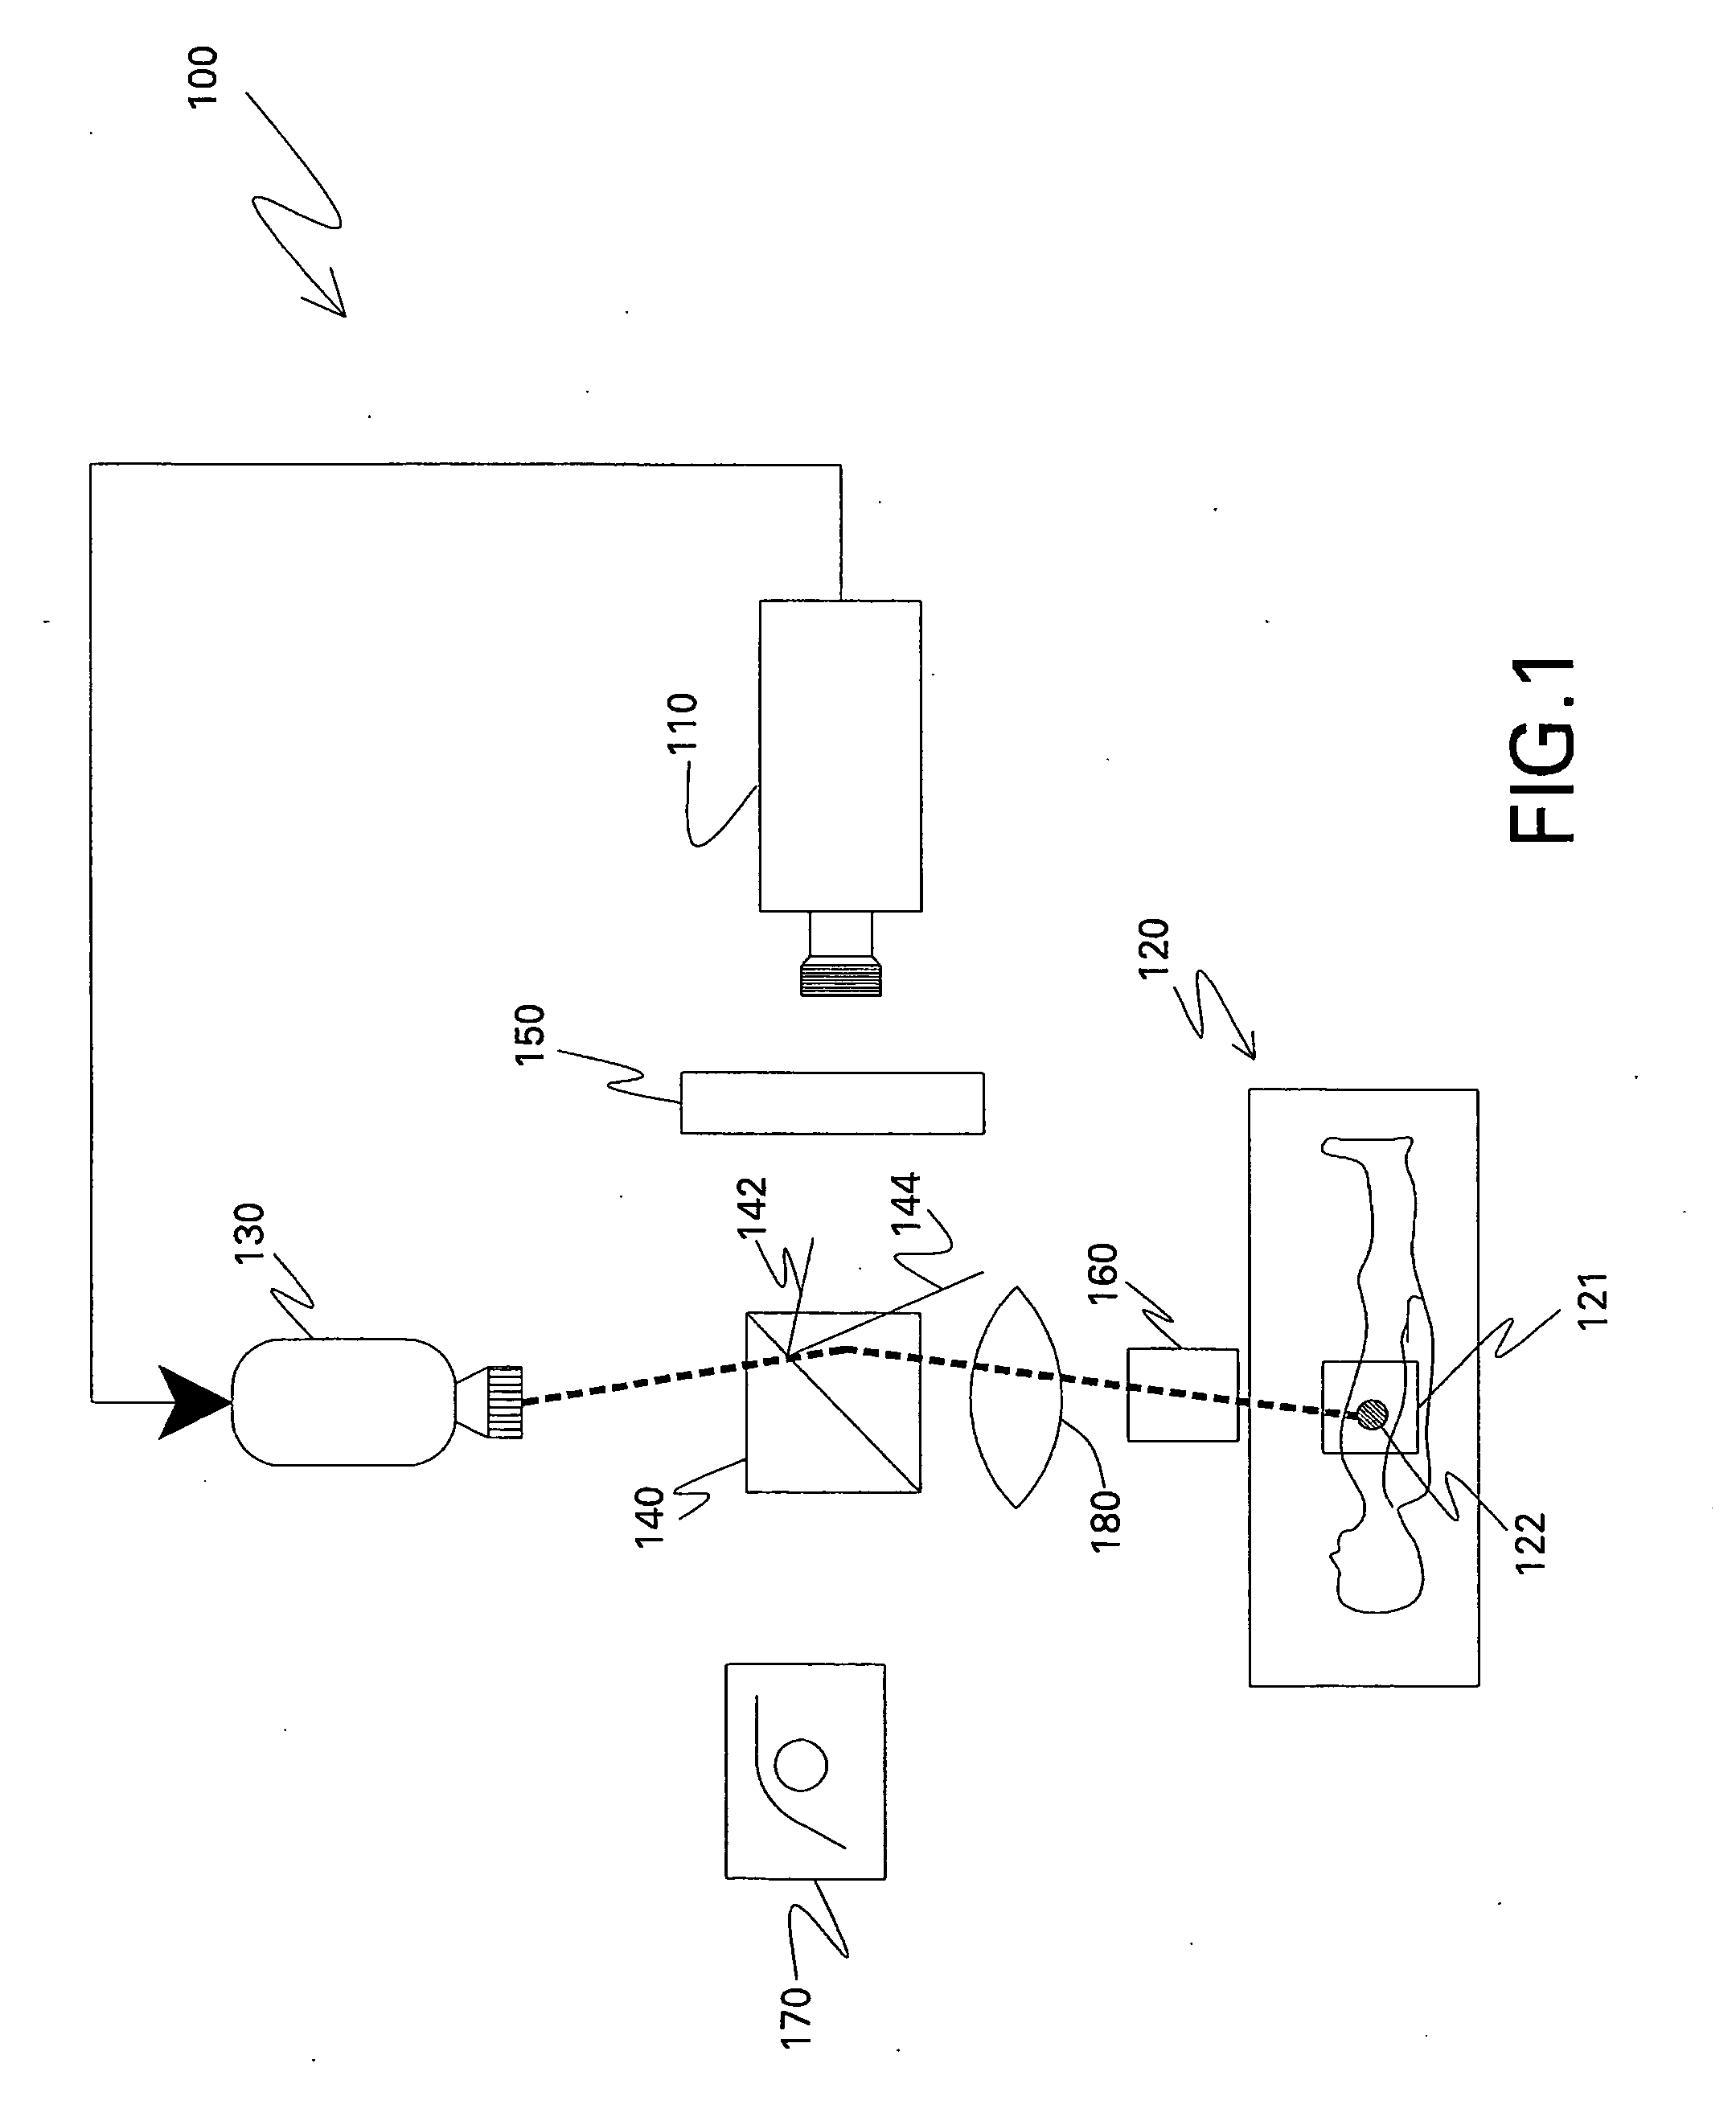 Optical imaging systems and methods